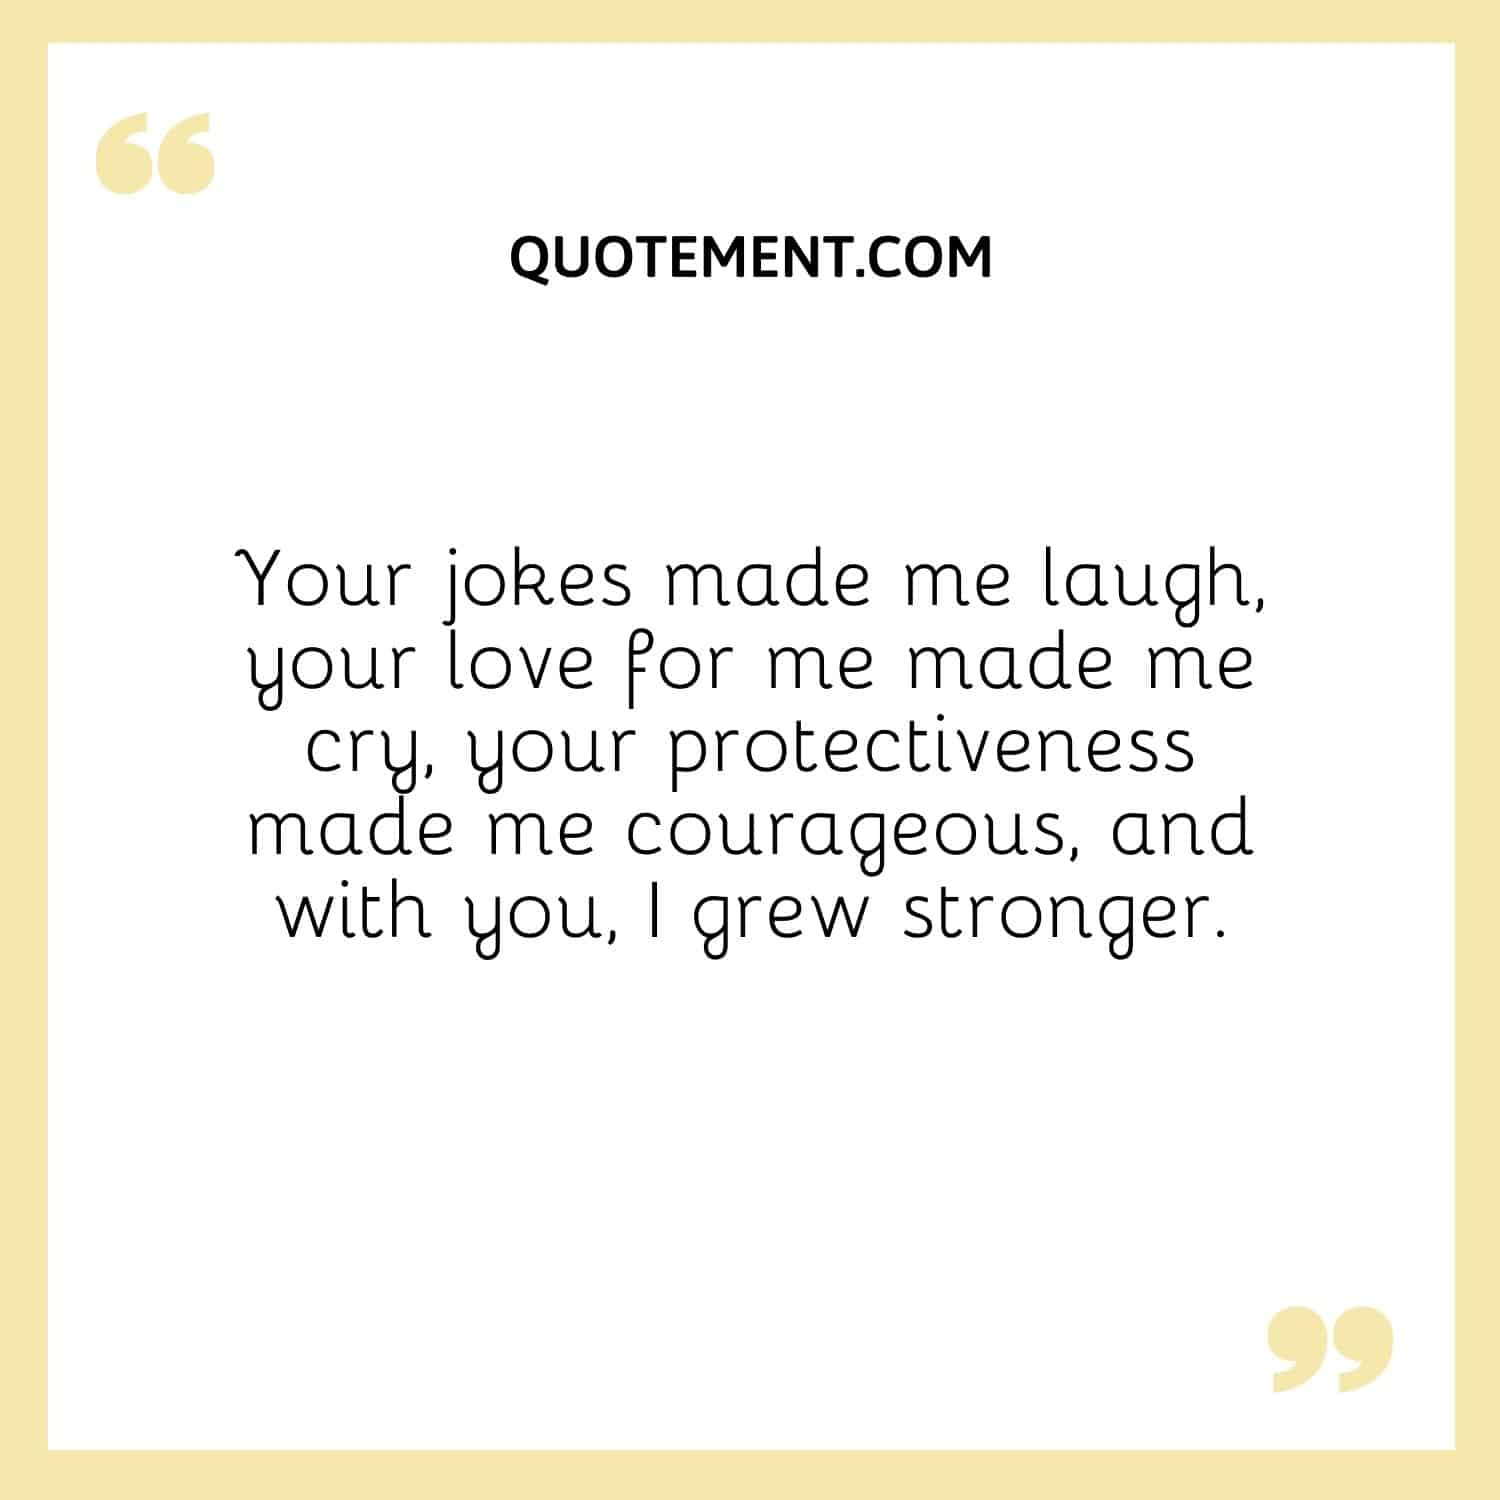 Your jokes made me laugh, your love for me made me cry, your protectiveness made me courageous, and with you, I grew stronger.